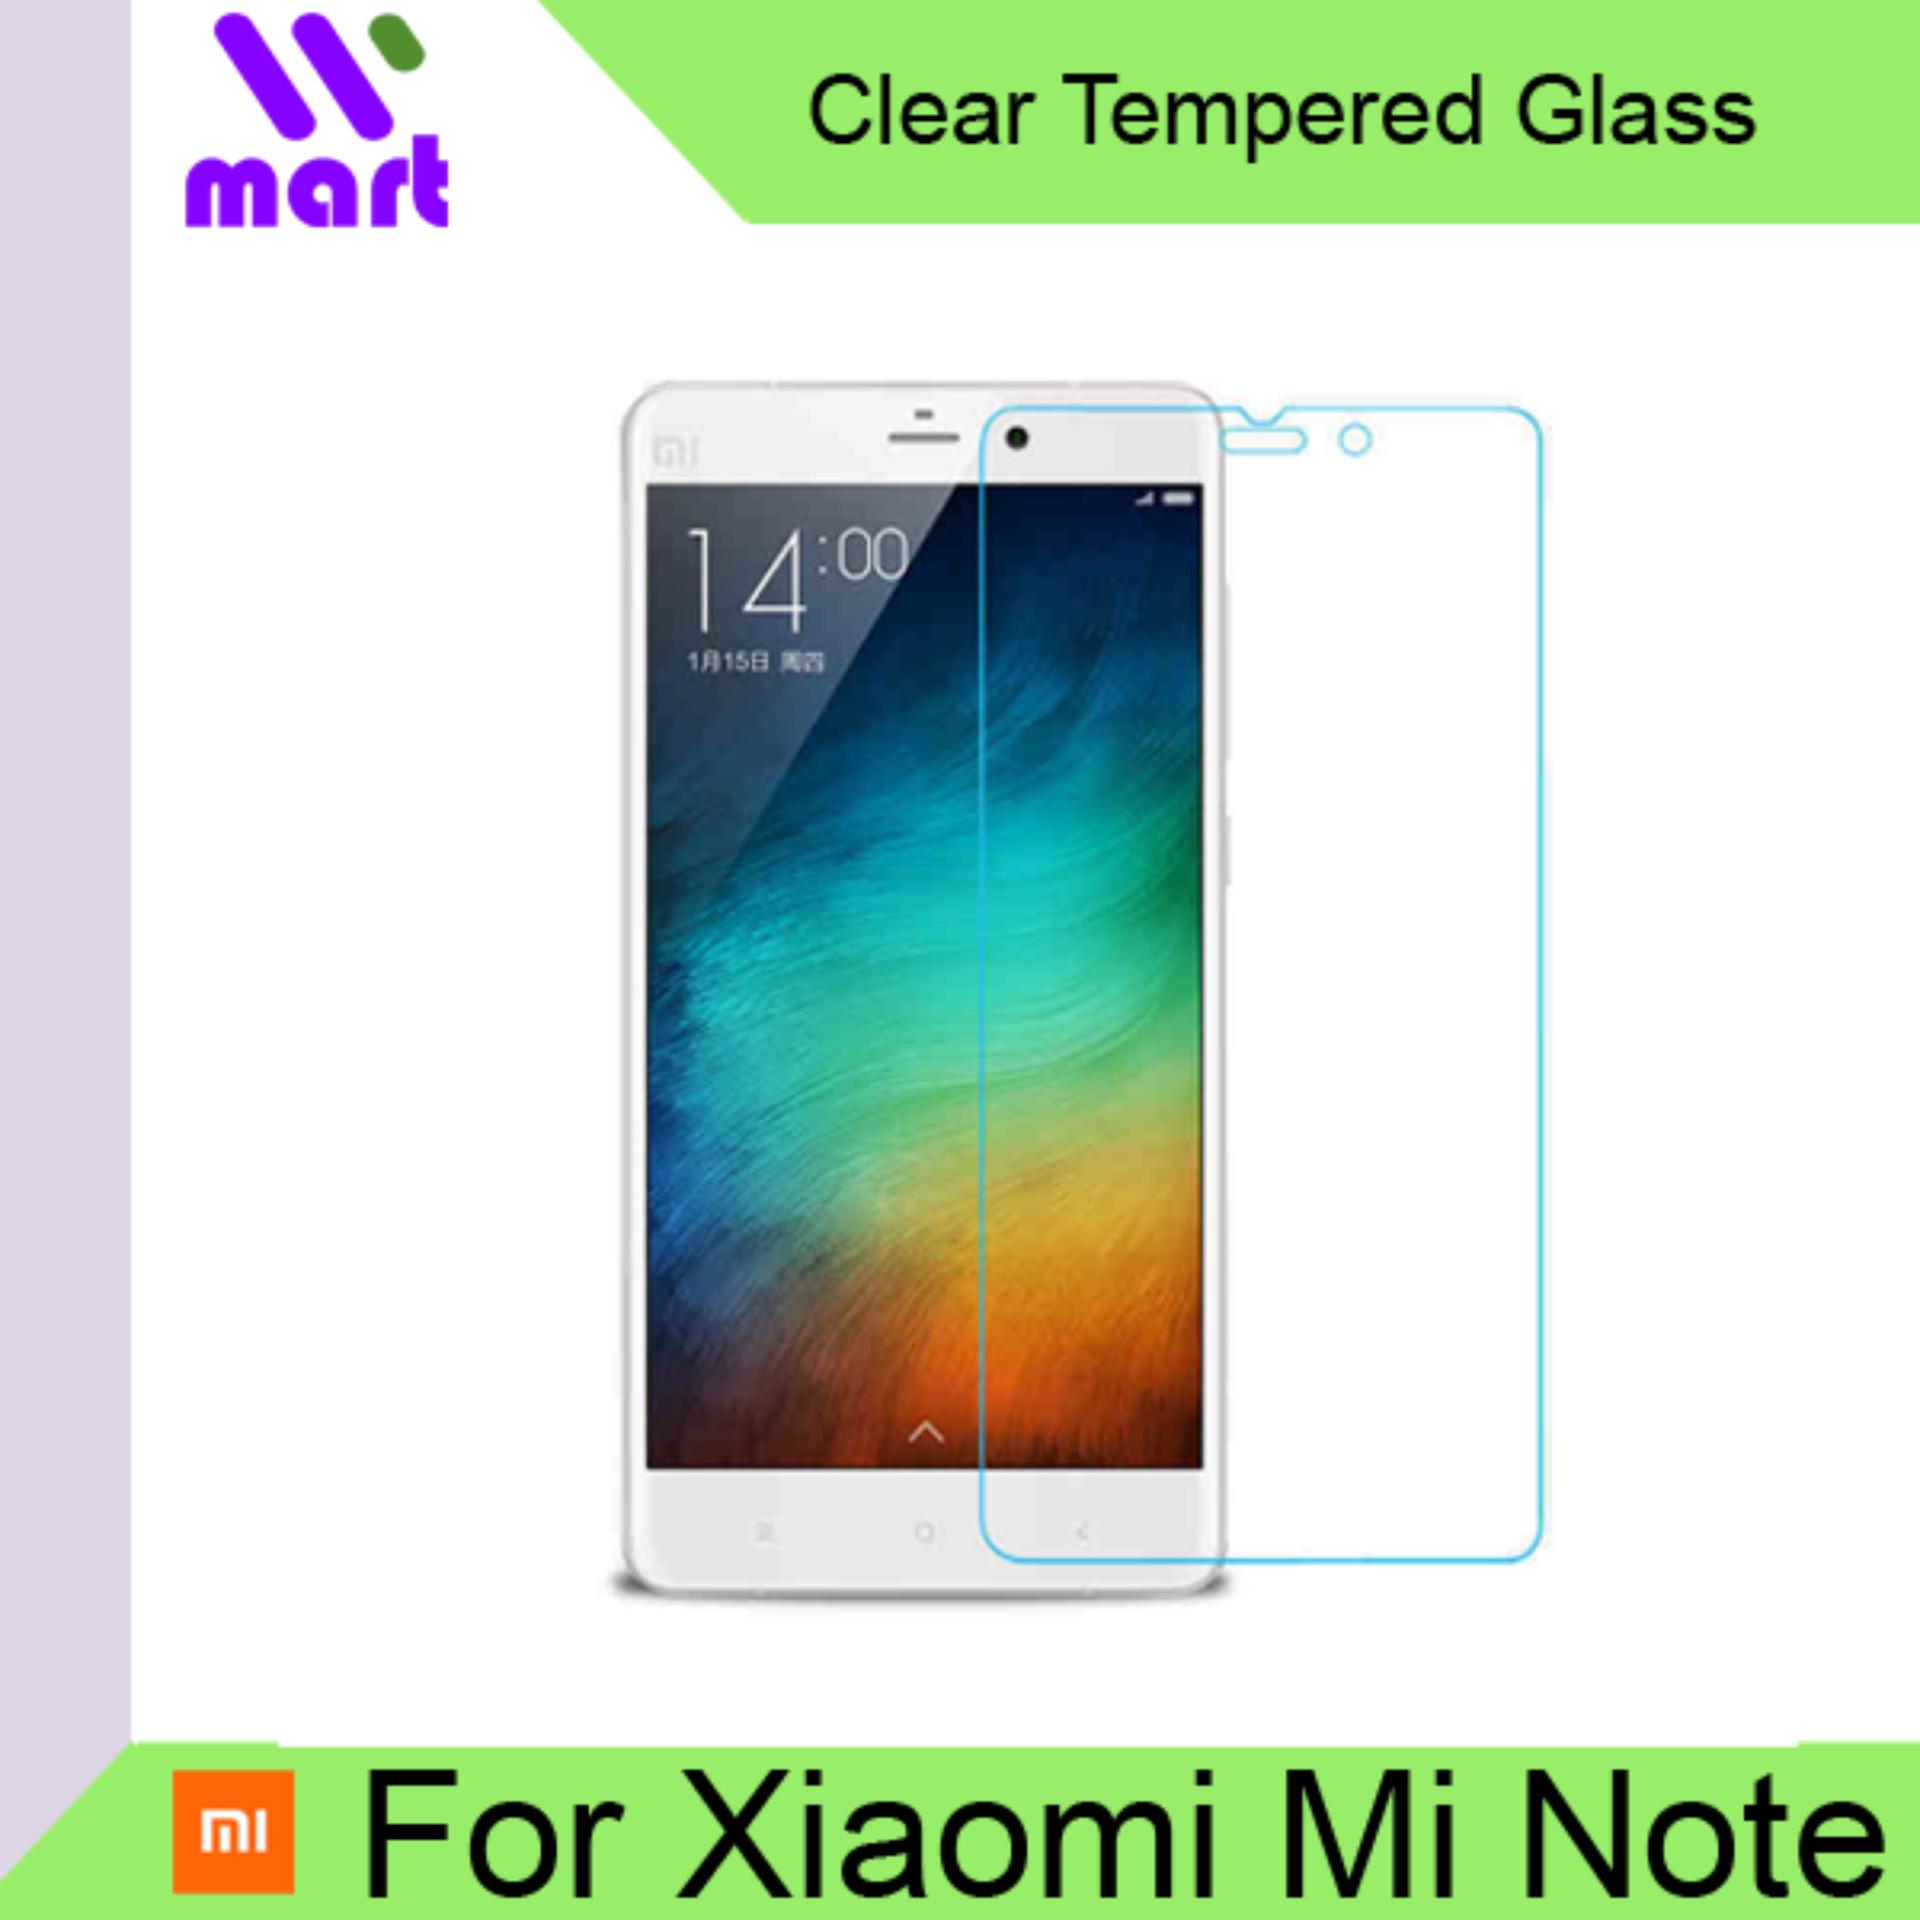 Tempered Glass Screen Protector (Clear) For Xiaomi Mi Note